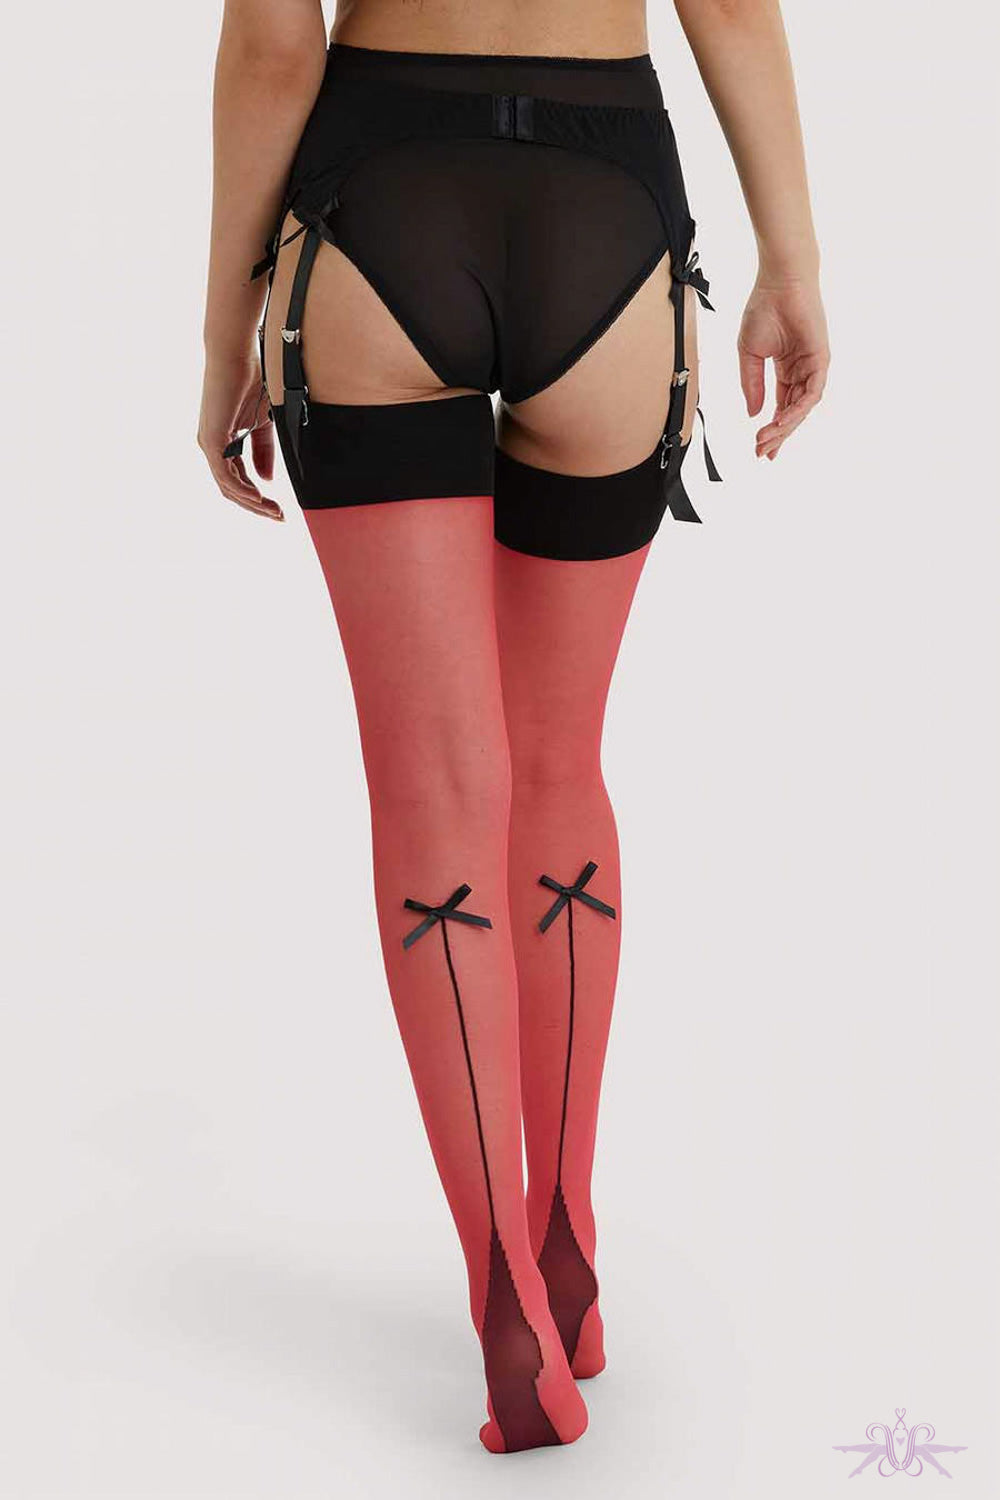 Playful Promises Red Bow Seamed Stockings